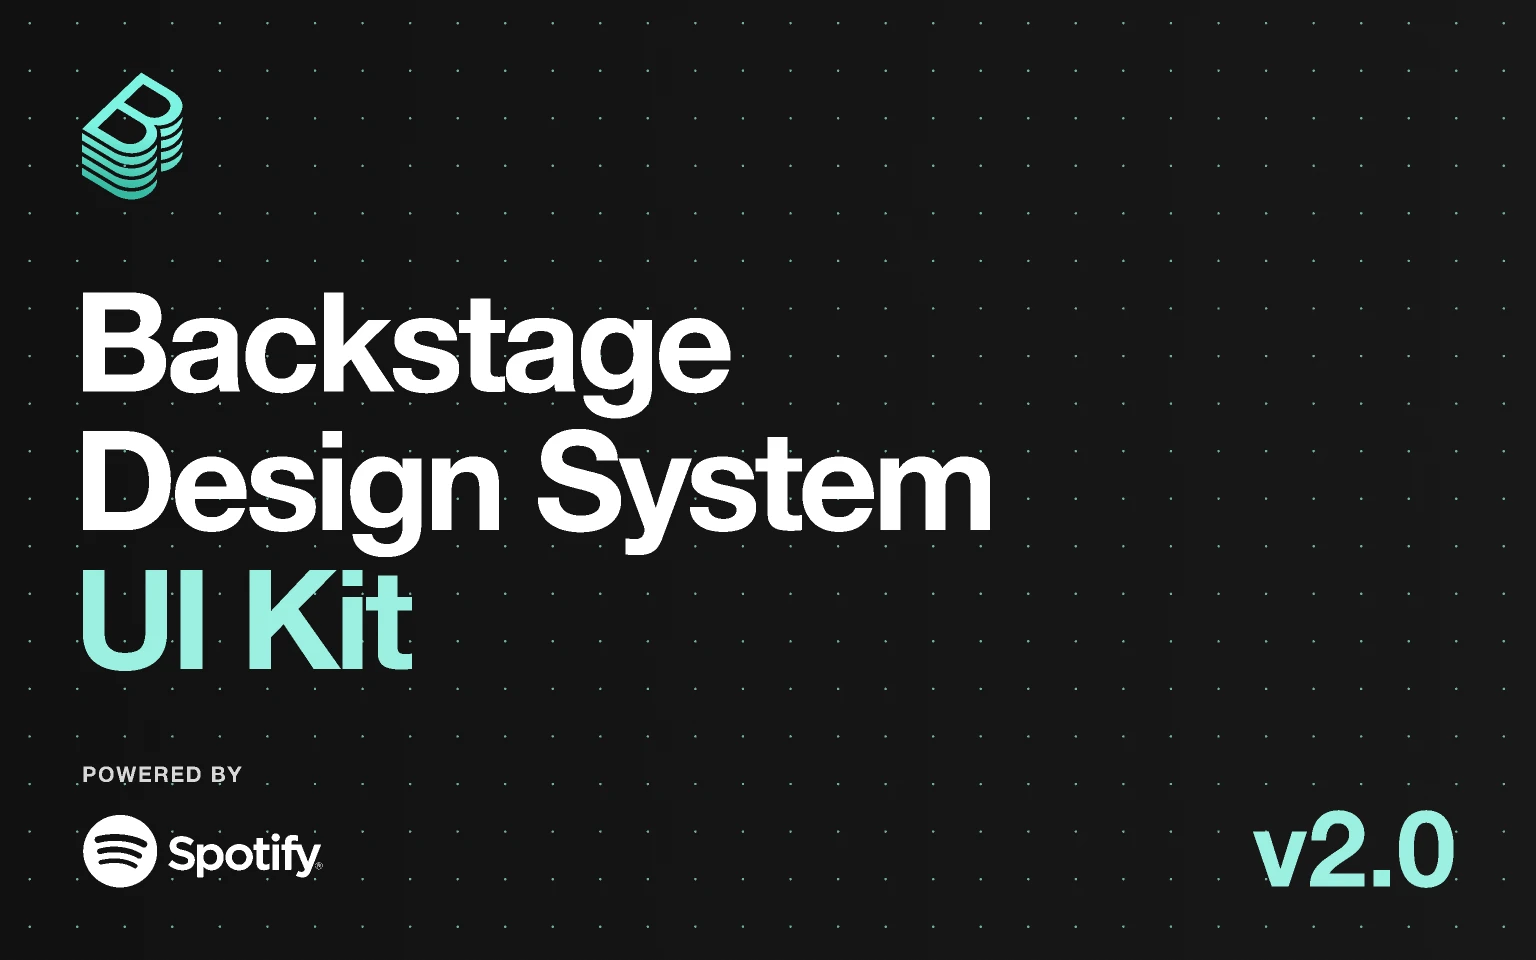 Backstage Design System for Figma and Adobe XD